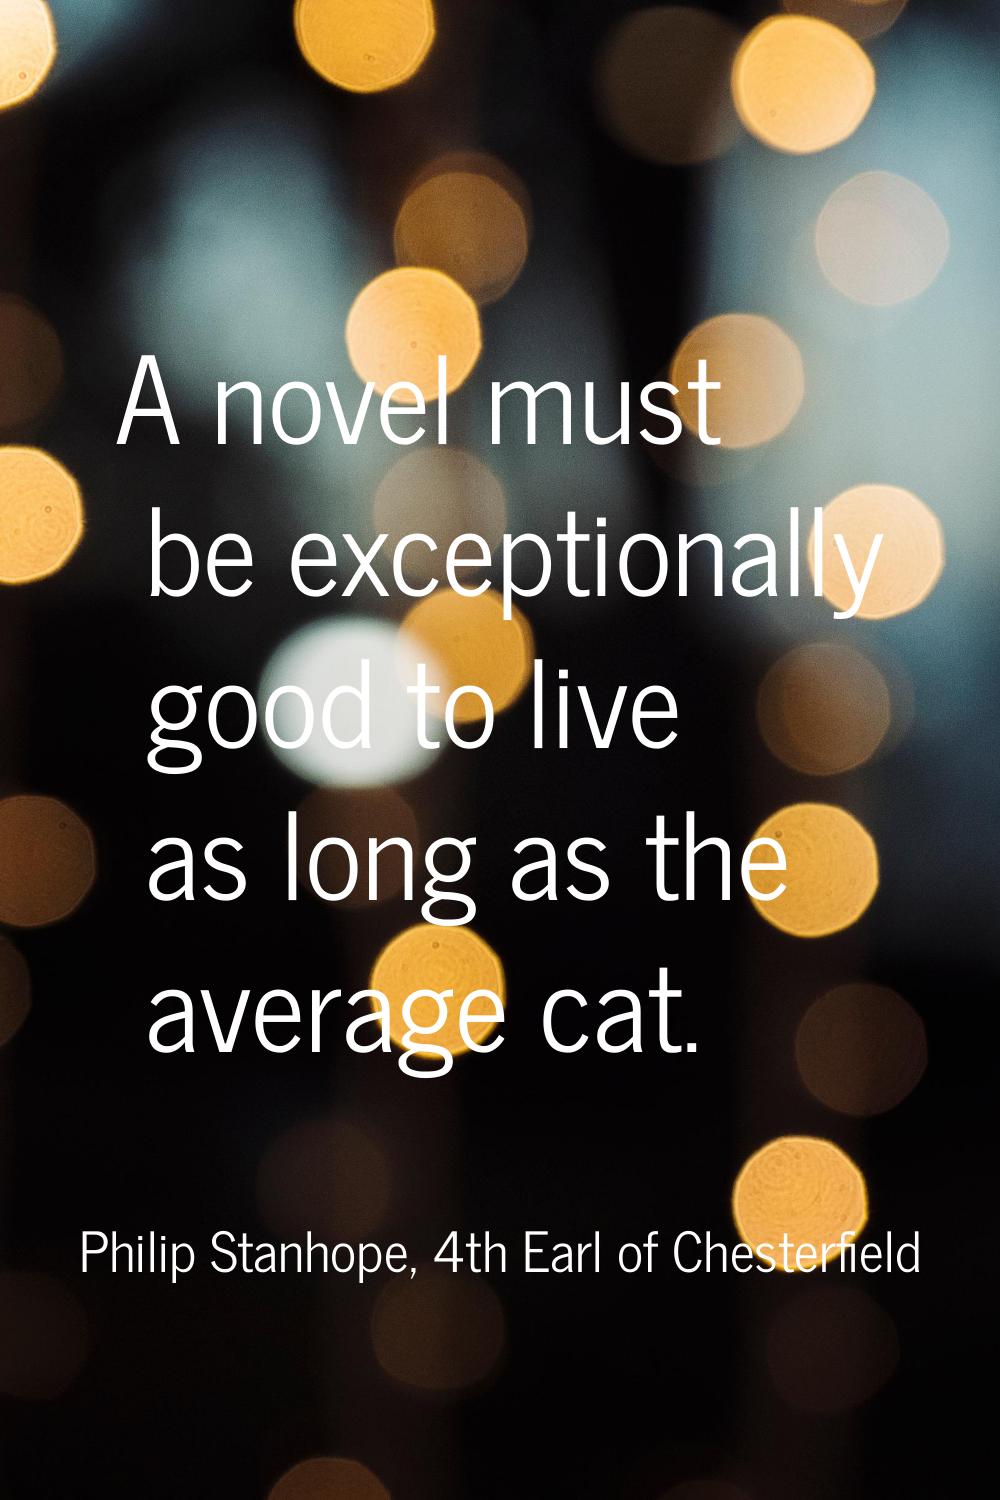 A novel must be exceptionally good to live as long as the average cat.